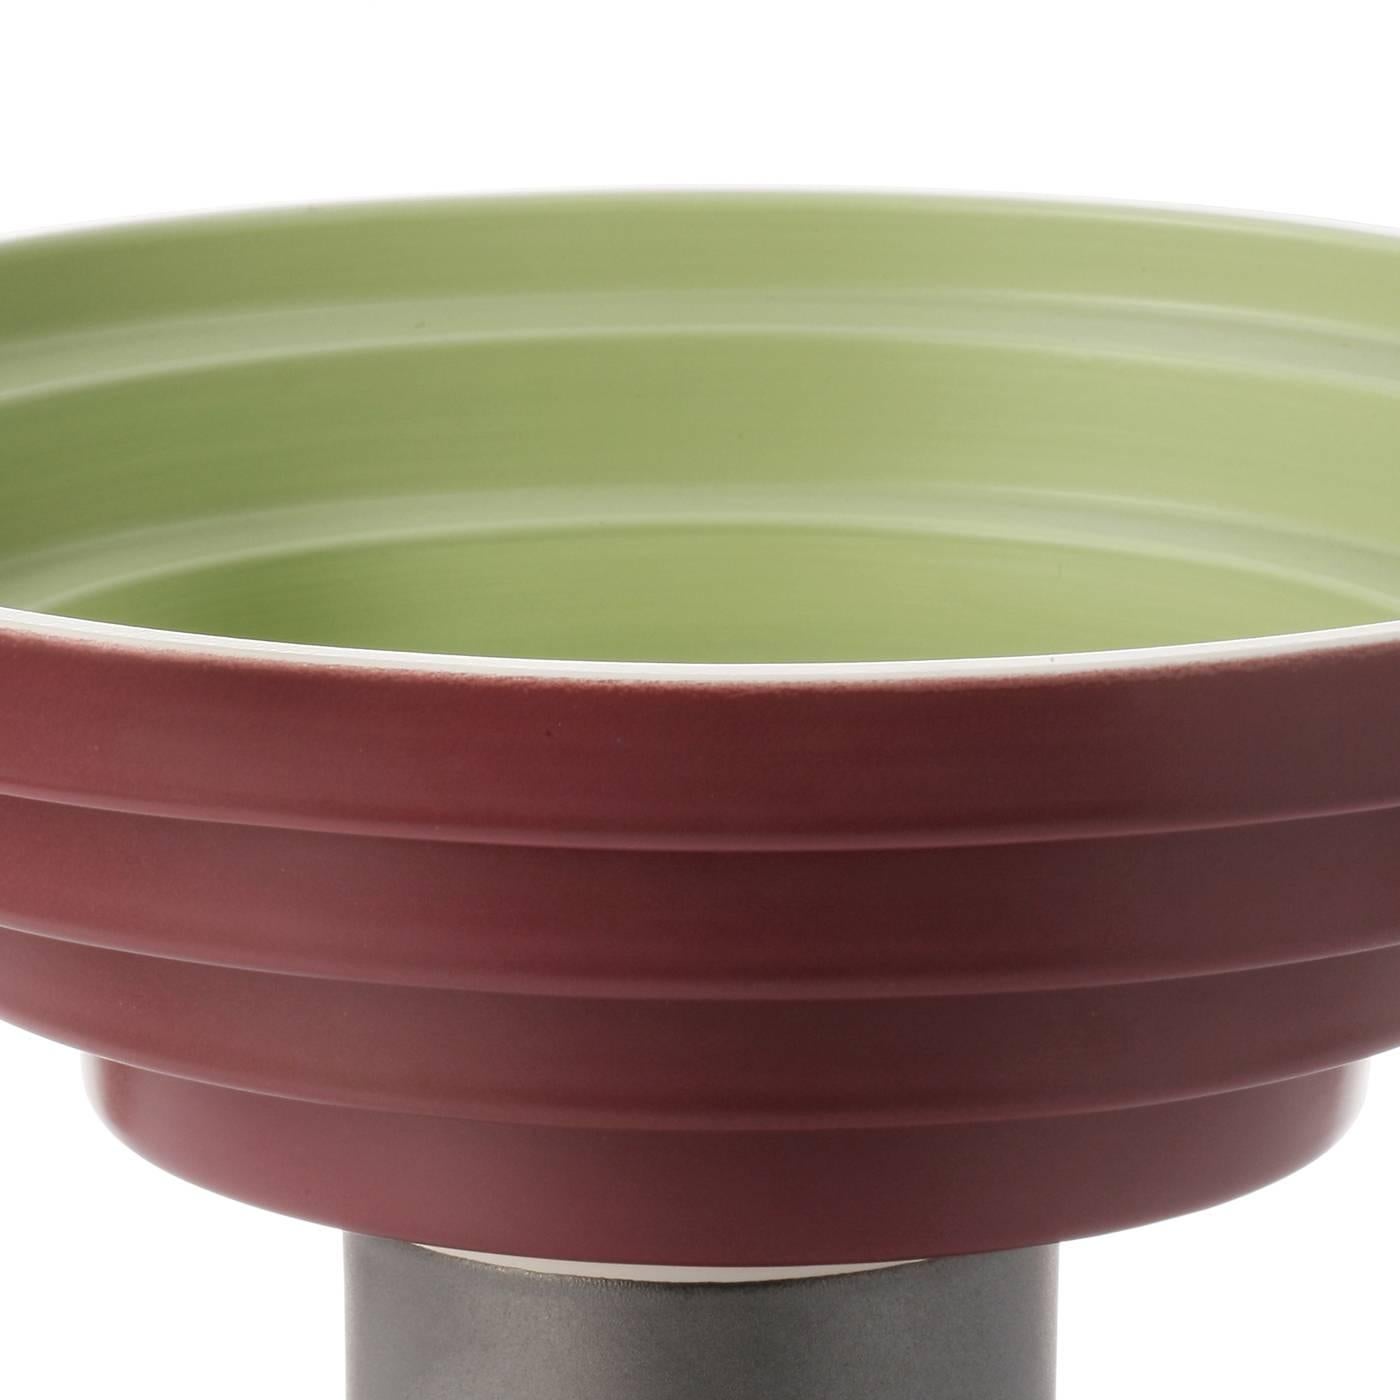 This elegant centerpiece in white clay features a base in dark grey supporting a conic body made of concentric steps that are finished in red on the outside and in vivid matte green on the inside. This piece was designed by famous architect Ettore